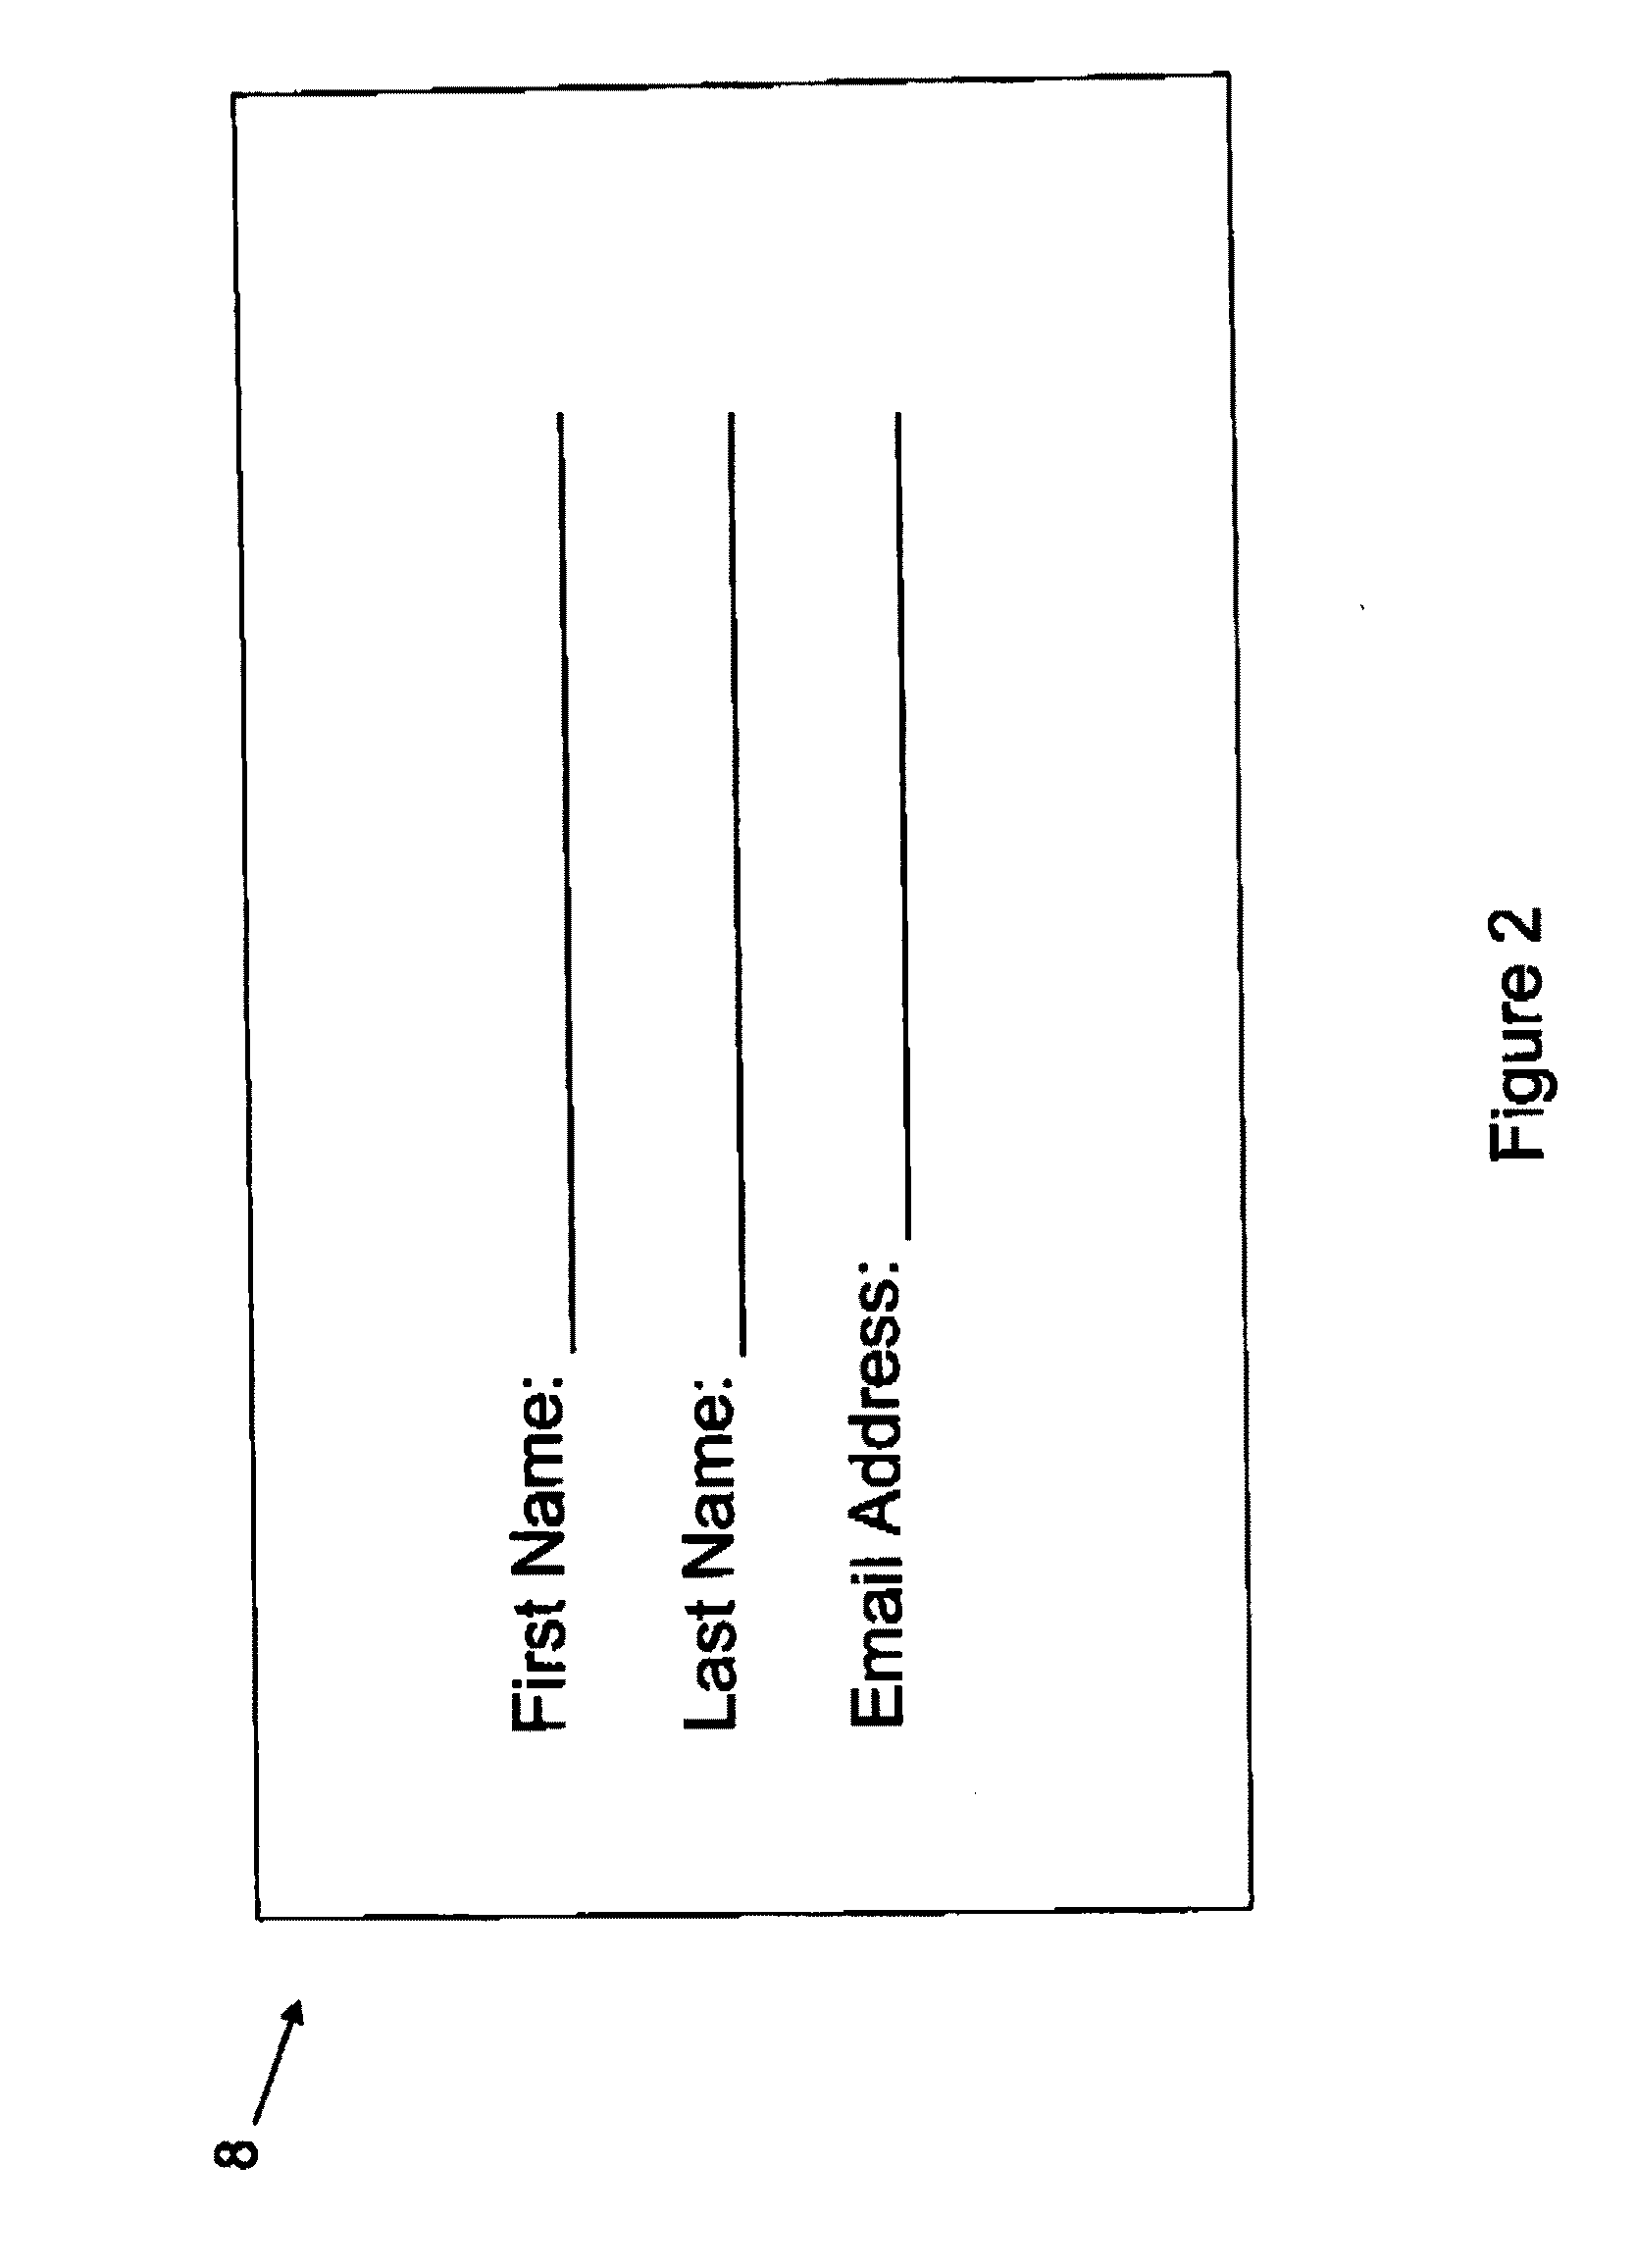 System and method for secure electronic communication services